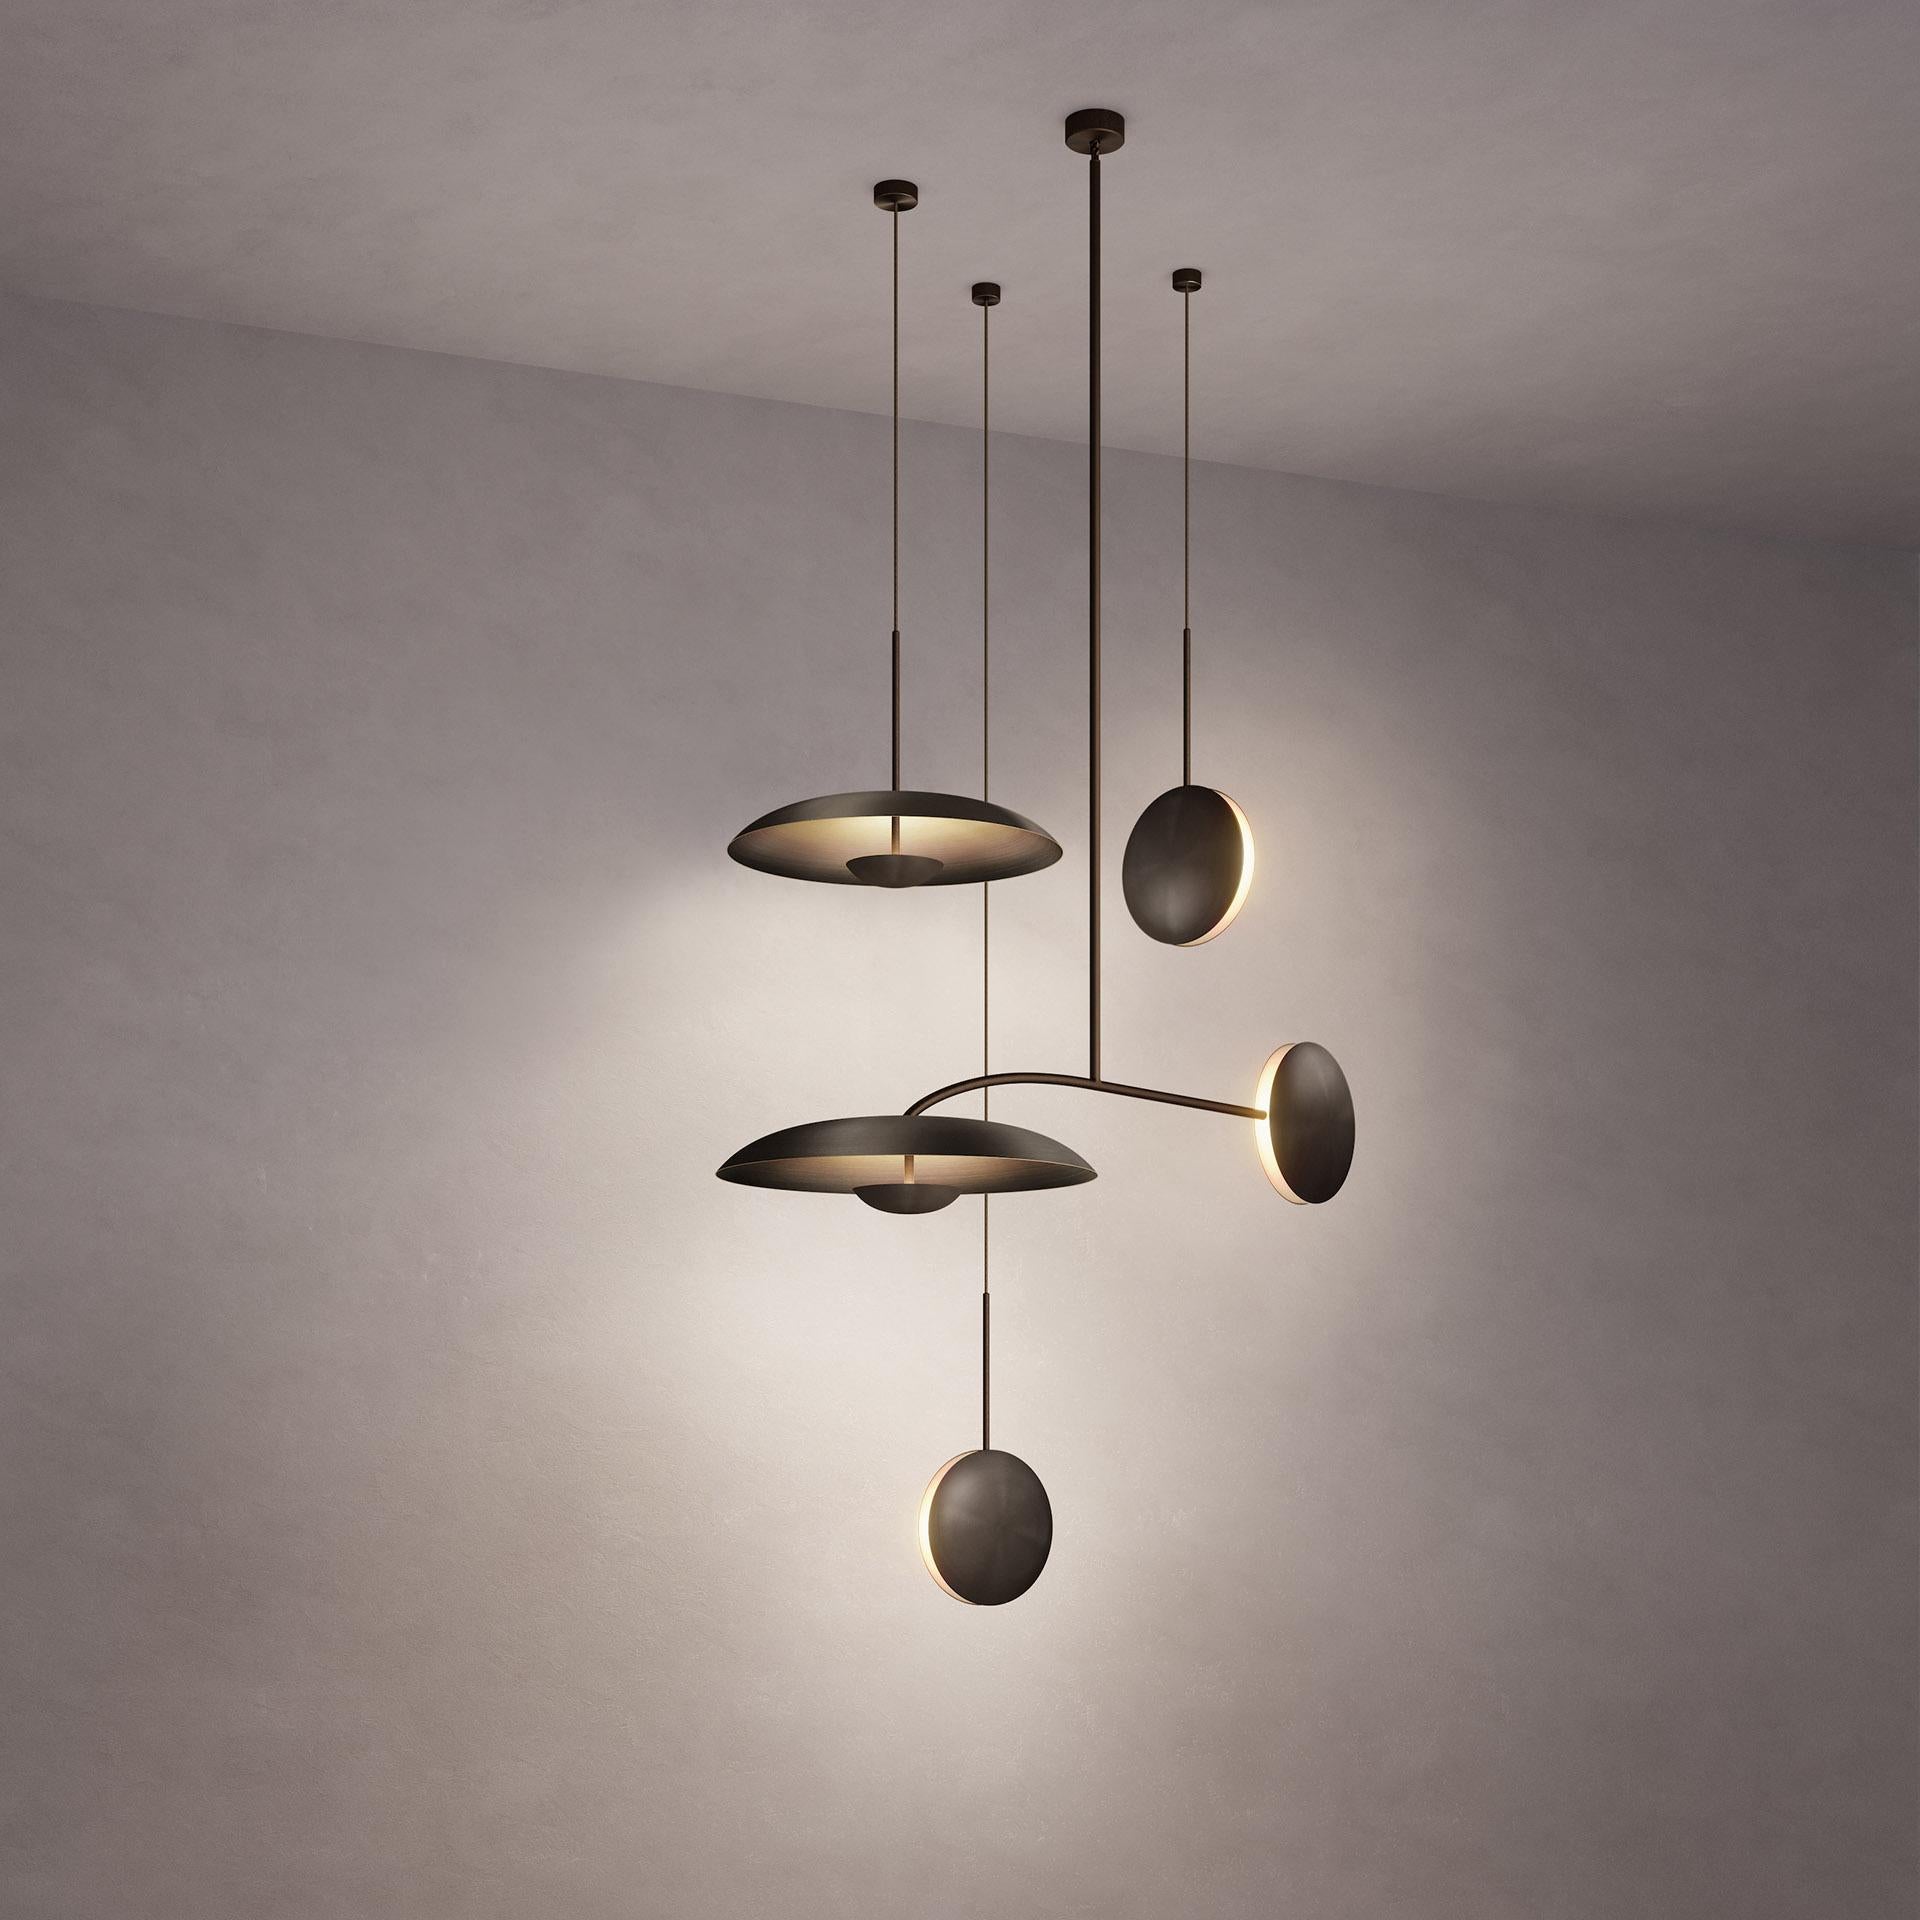 Inspired by planet-like shapes and textures, the Cosmic collection plays with both metal properties and a selection of patina finishes.
 
Named after the natural dark rock material Regolith, the four lighting components are harmoniously balanced to